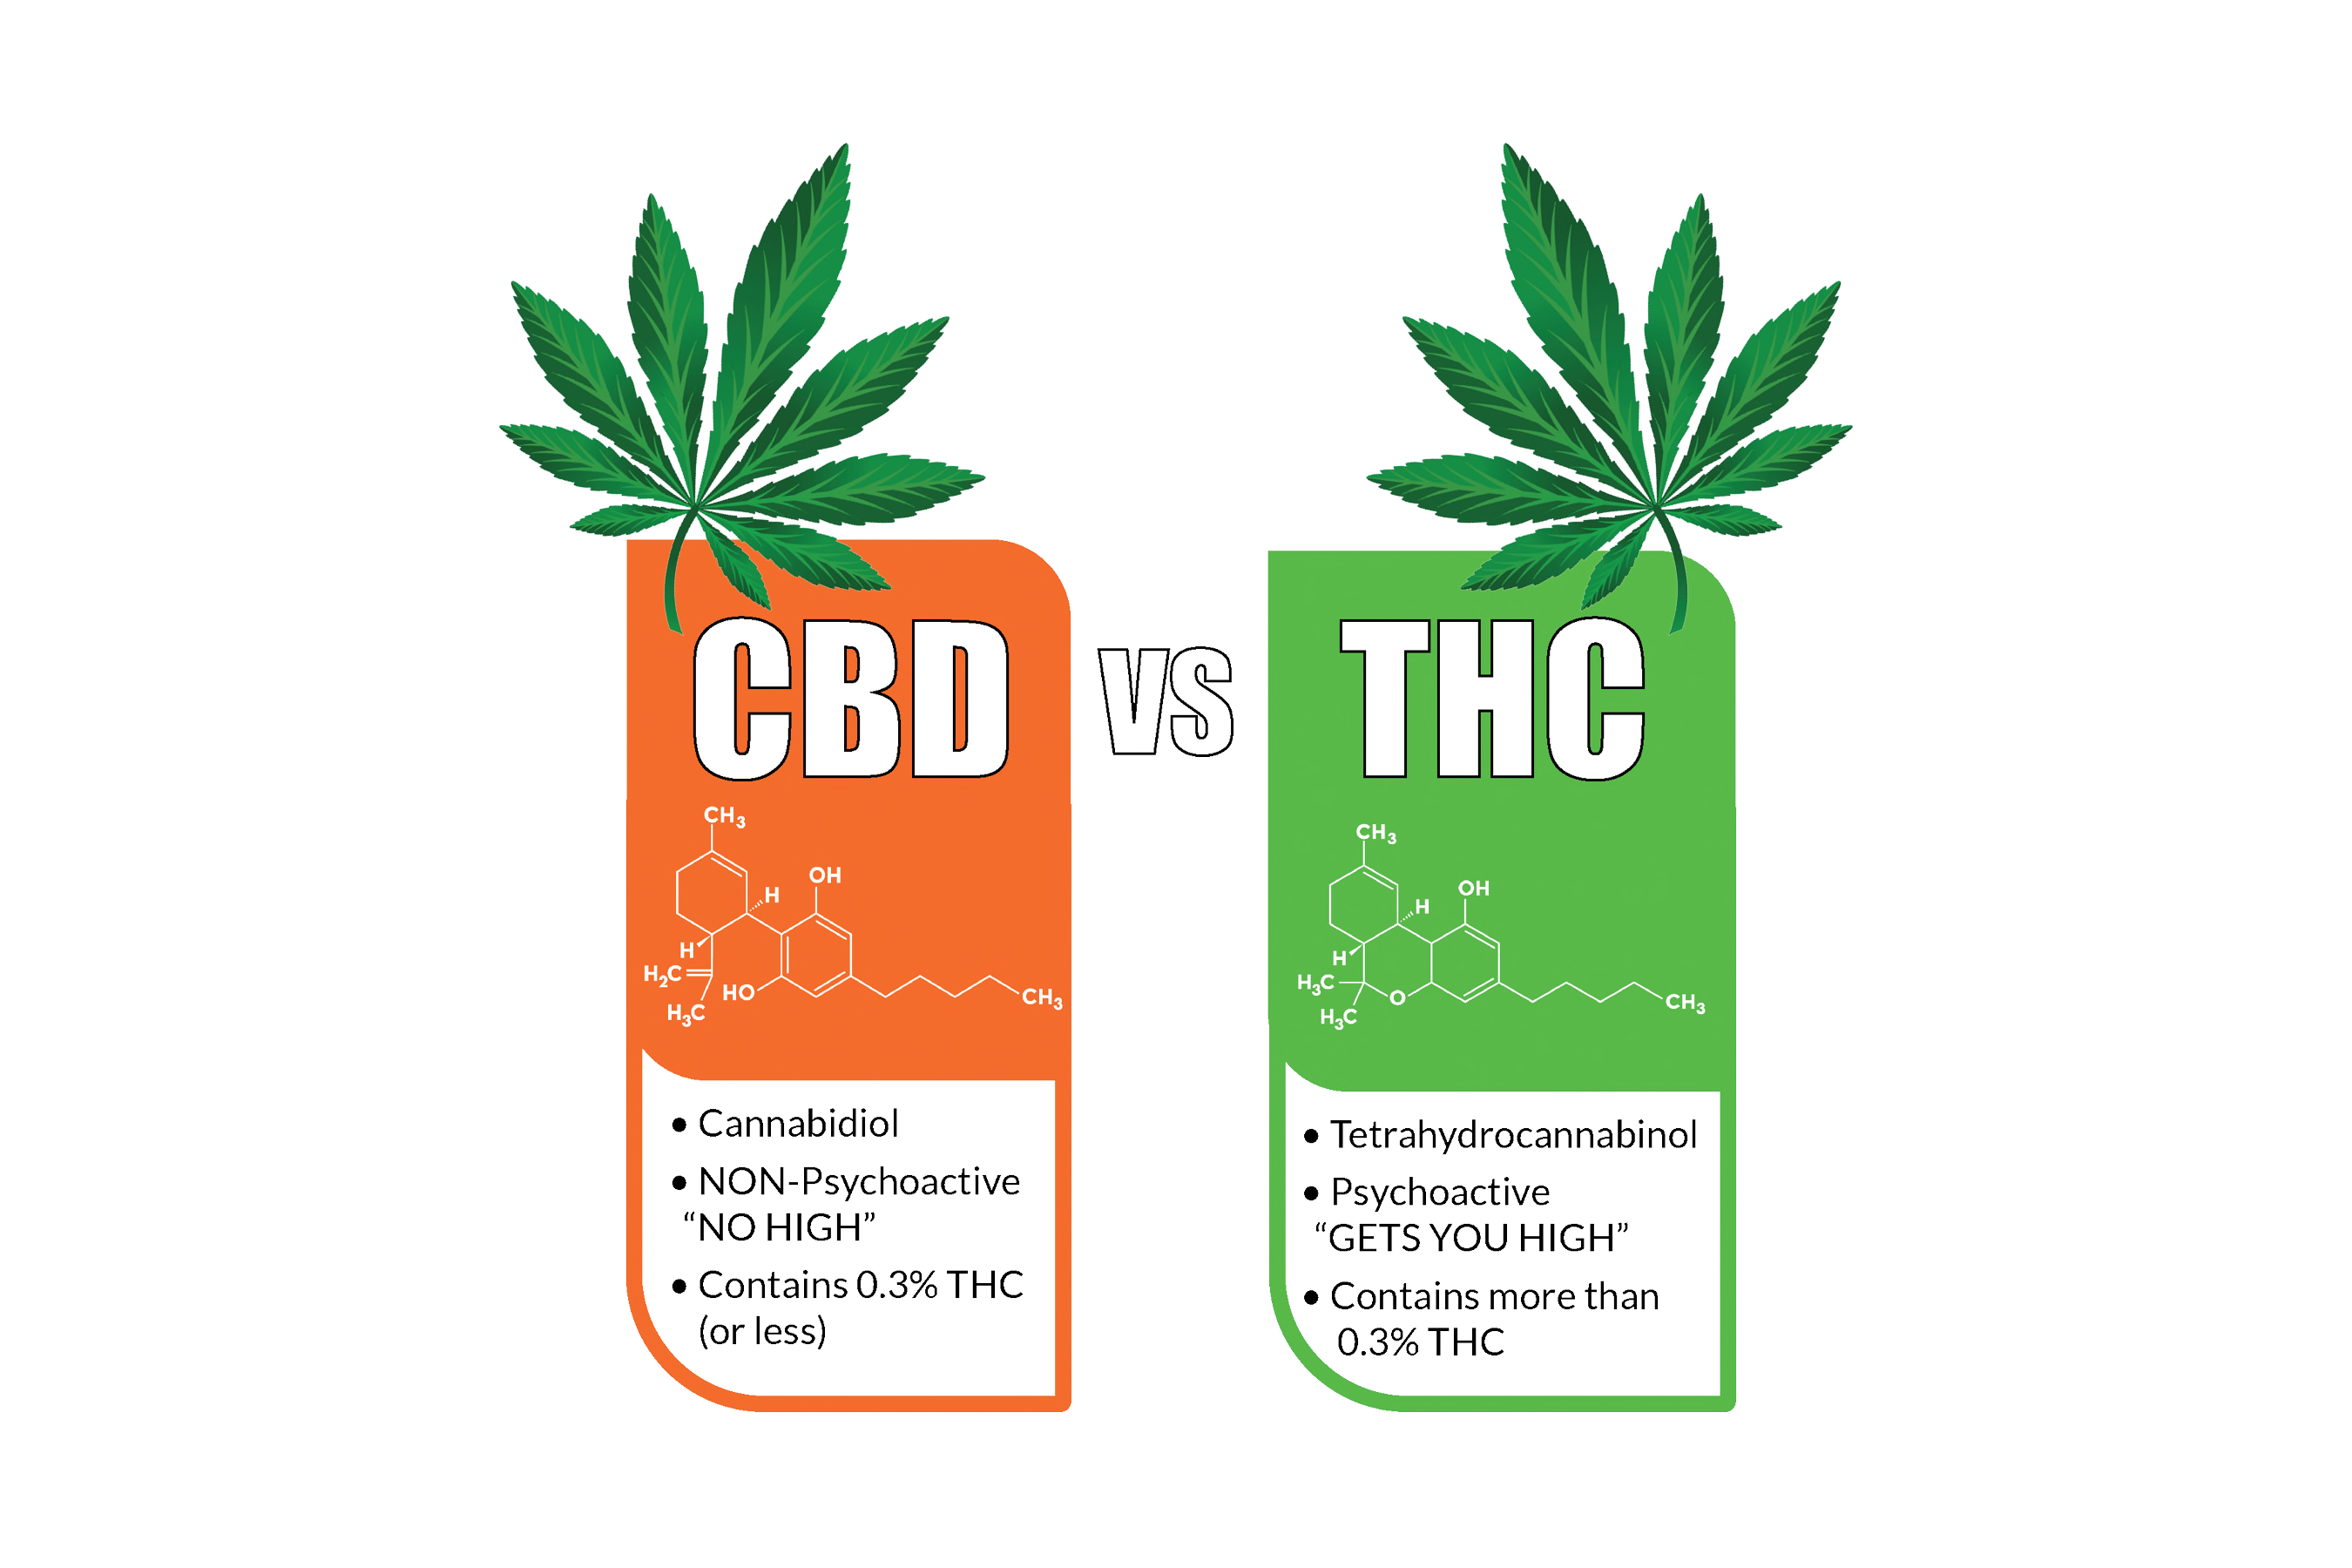 Differences between CBD and THC